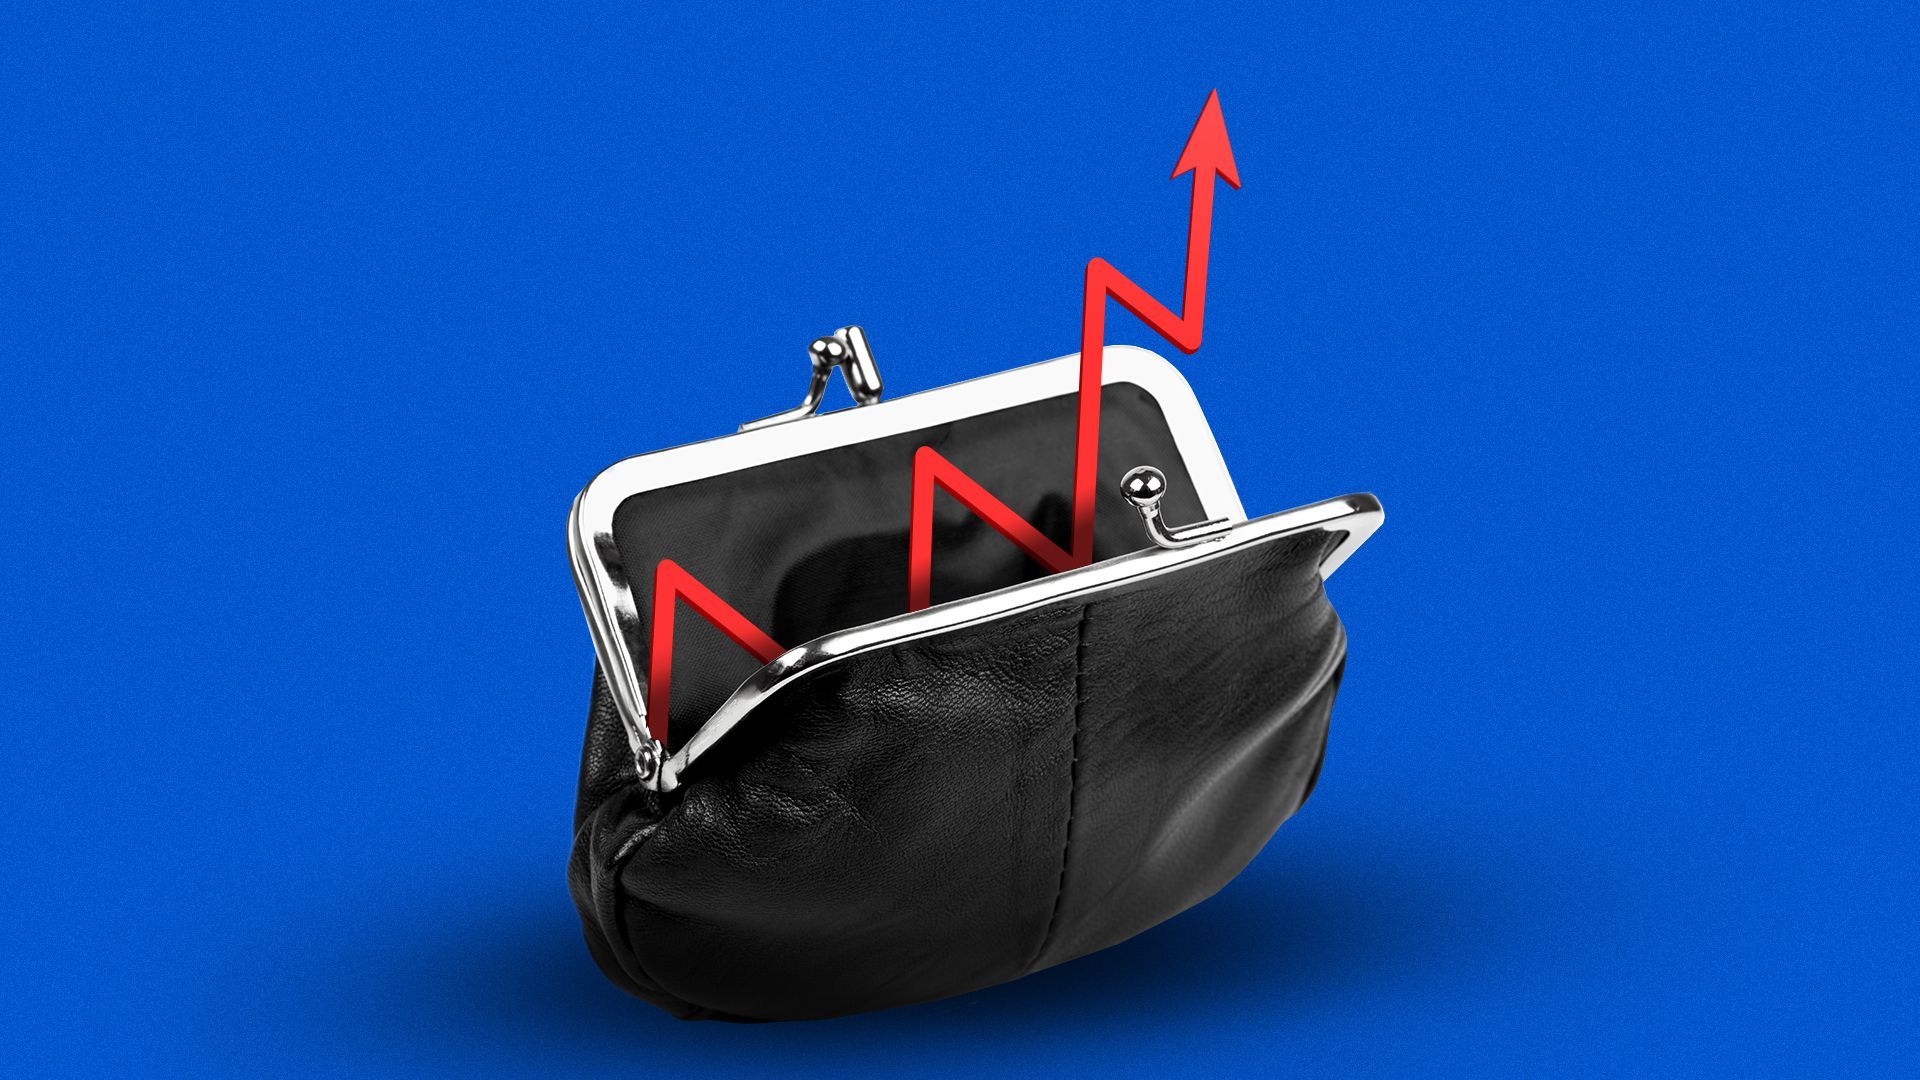 Illustration of a stock trend line springing from an open coin purse